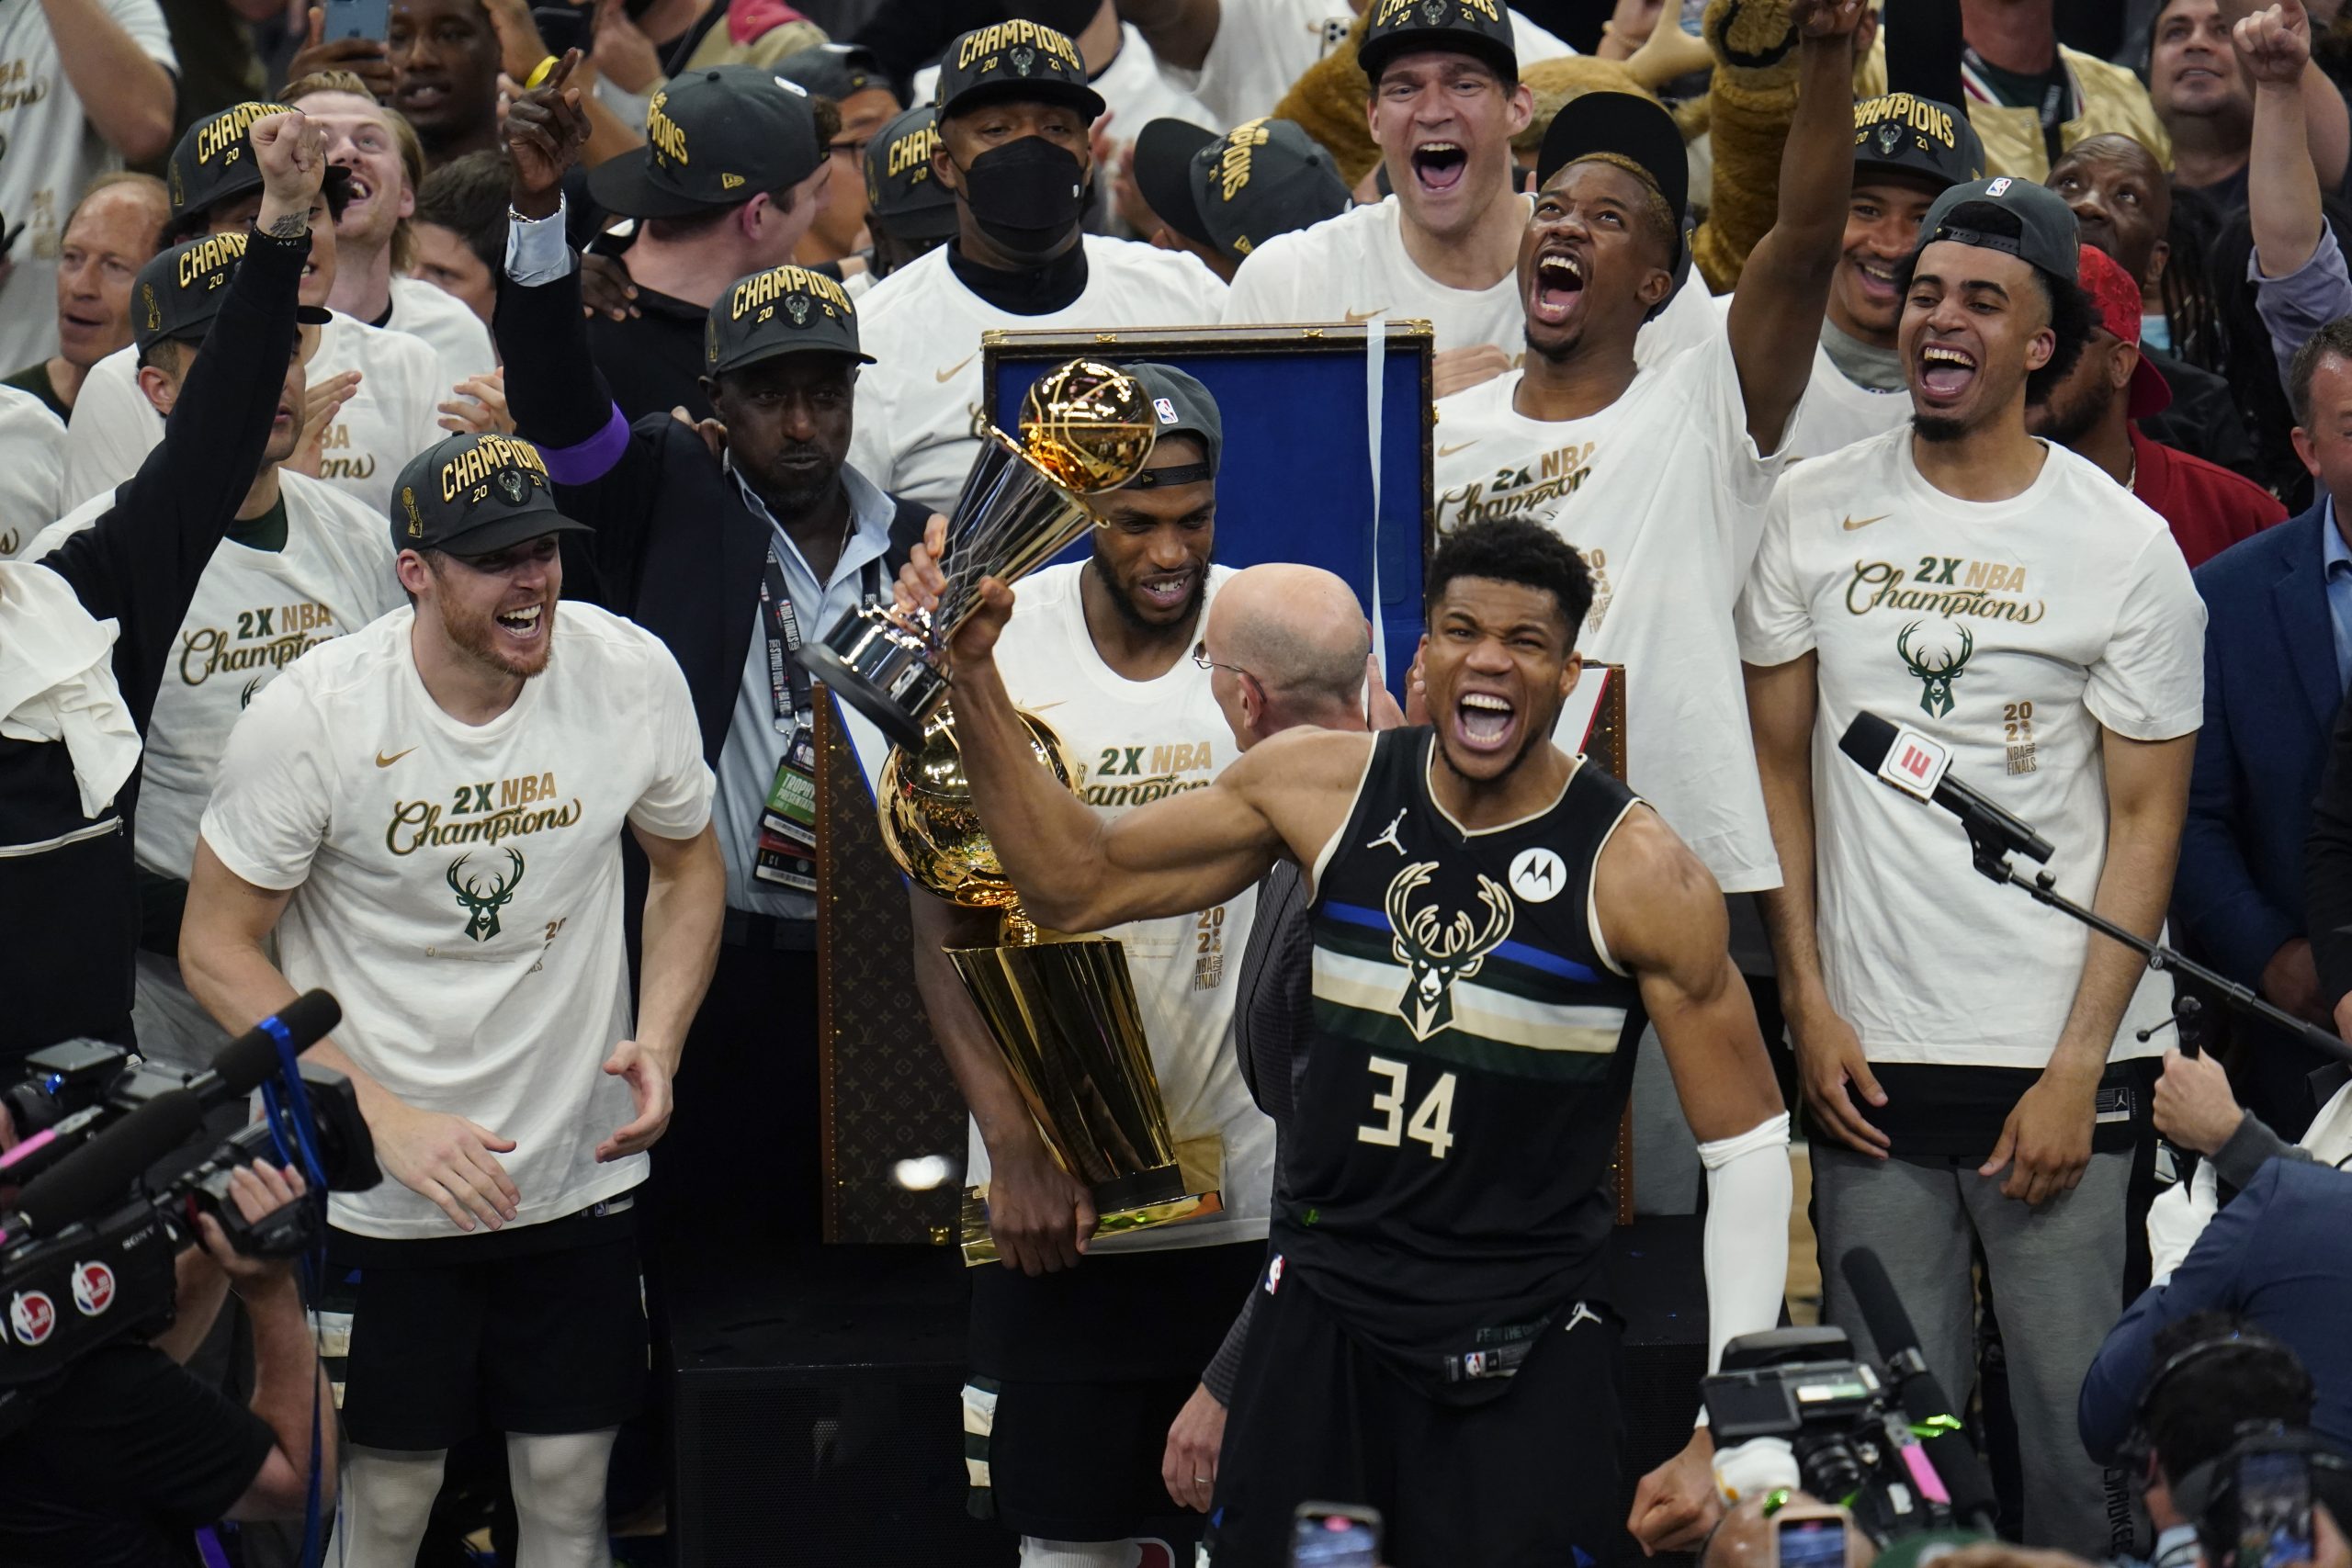 Milwaukee Bucks forward Giannis Antetokounmpo (34) holds up the MVP trophy after defeating the Phoenix Suns in Game 6 of basketball's NBA Finals in Milwaukee, Tuesday, July 20, 2021. The Bucks won 105-98. (AP Photo/Paul Sancya)